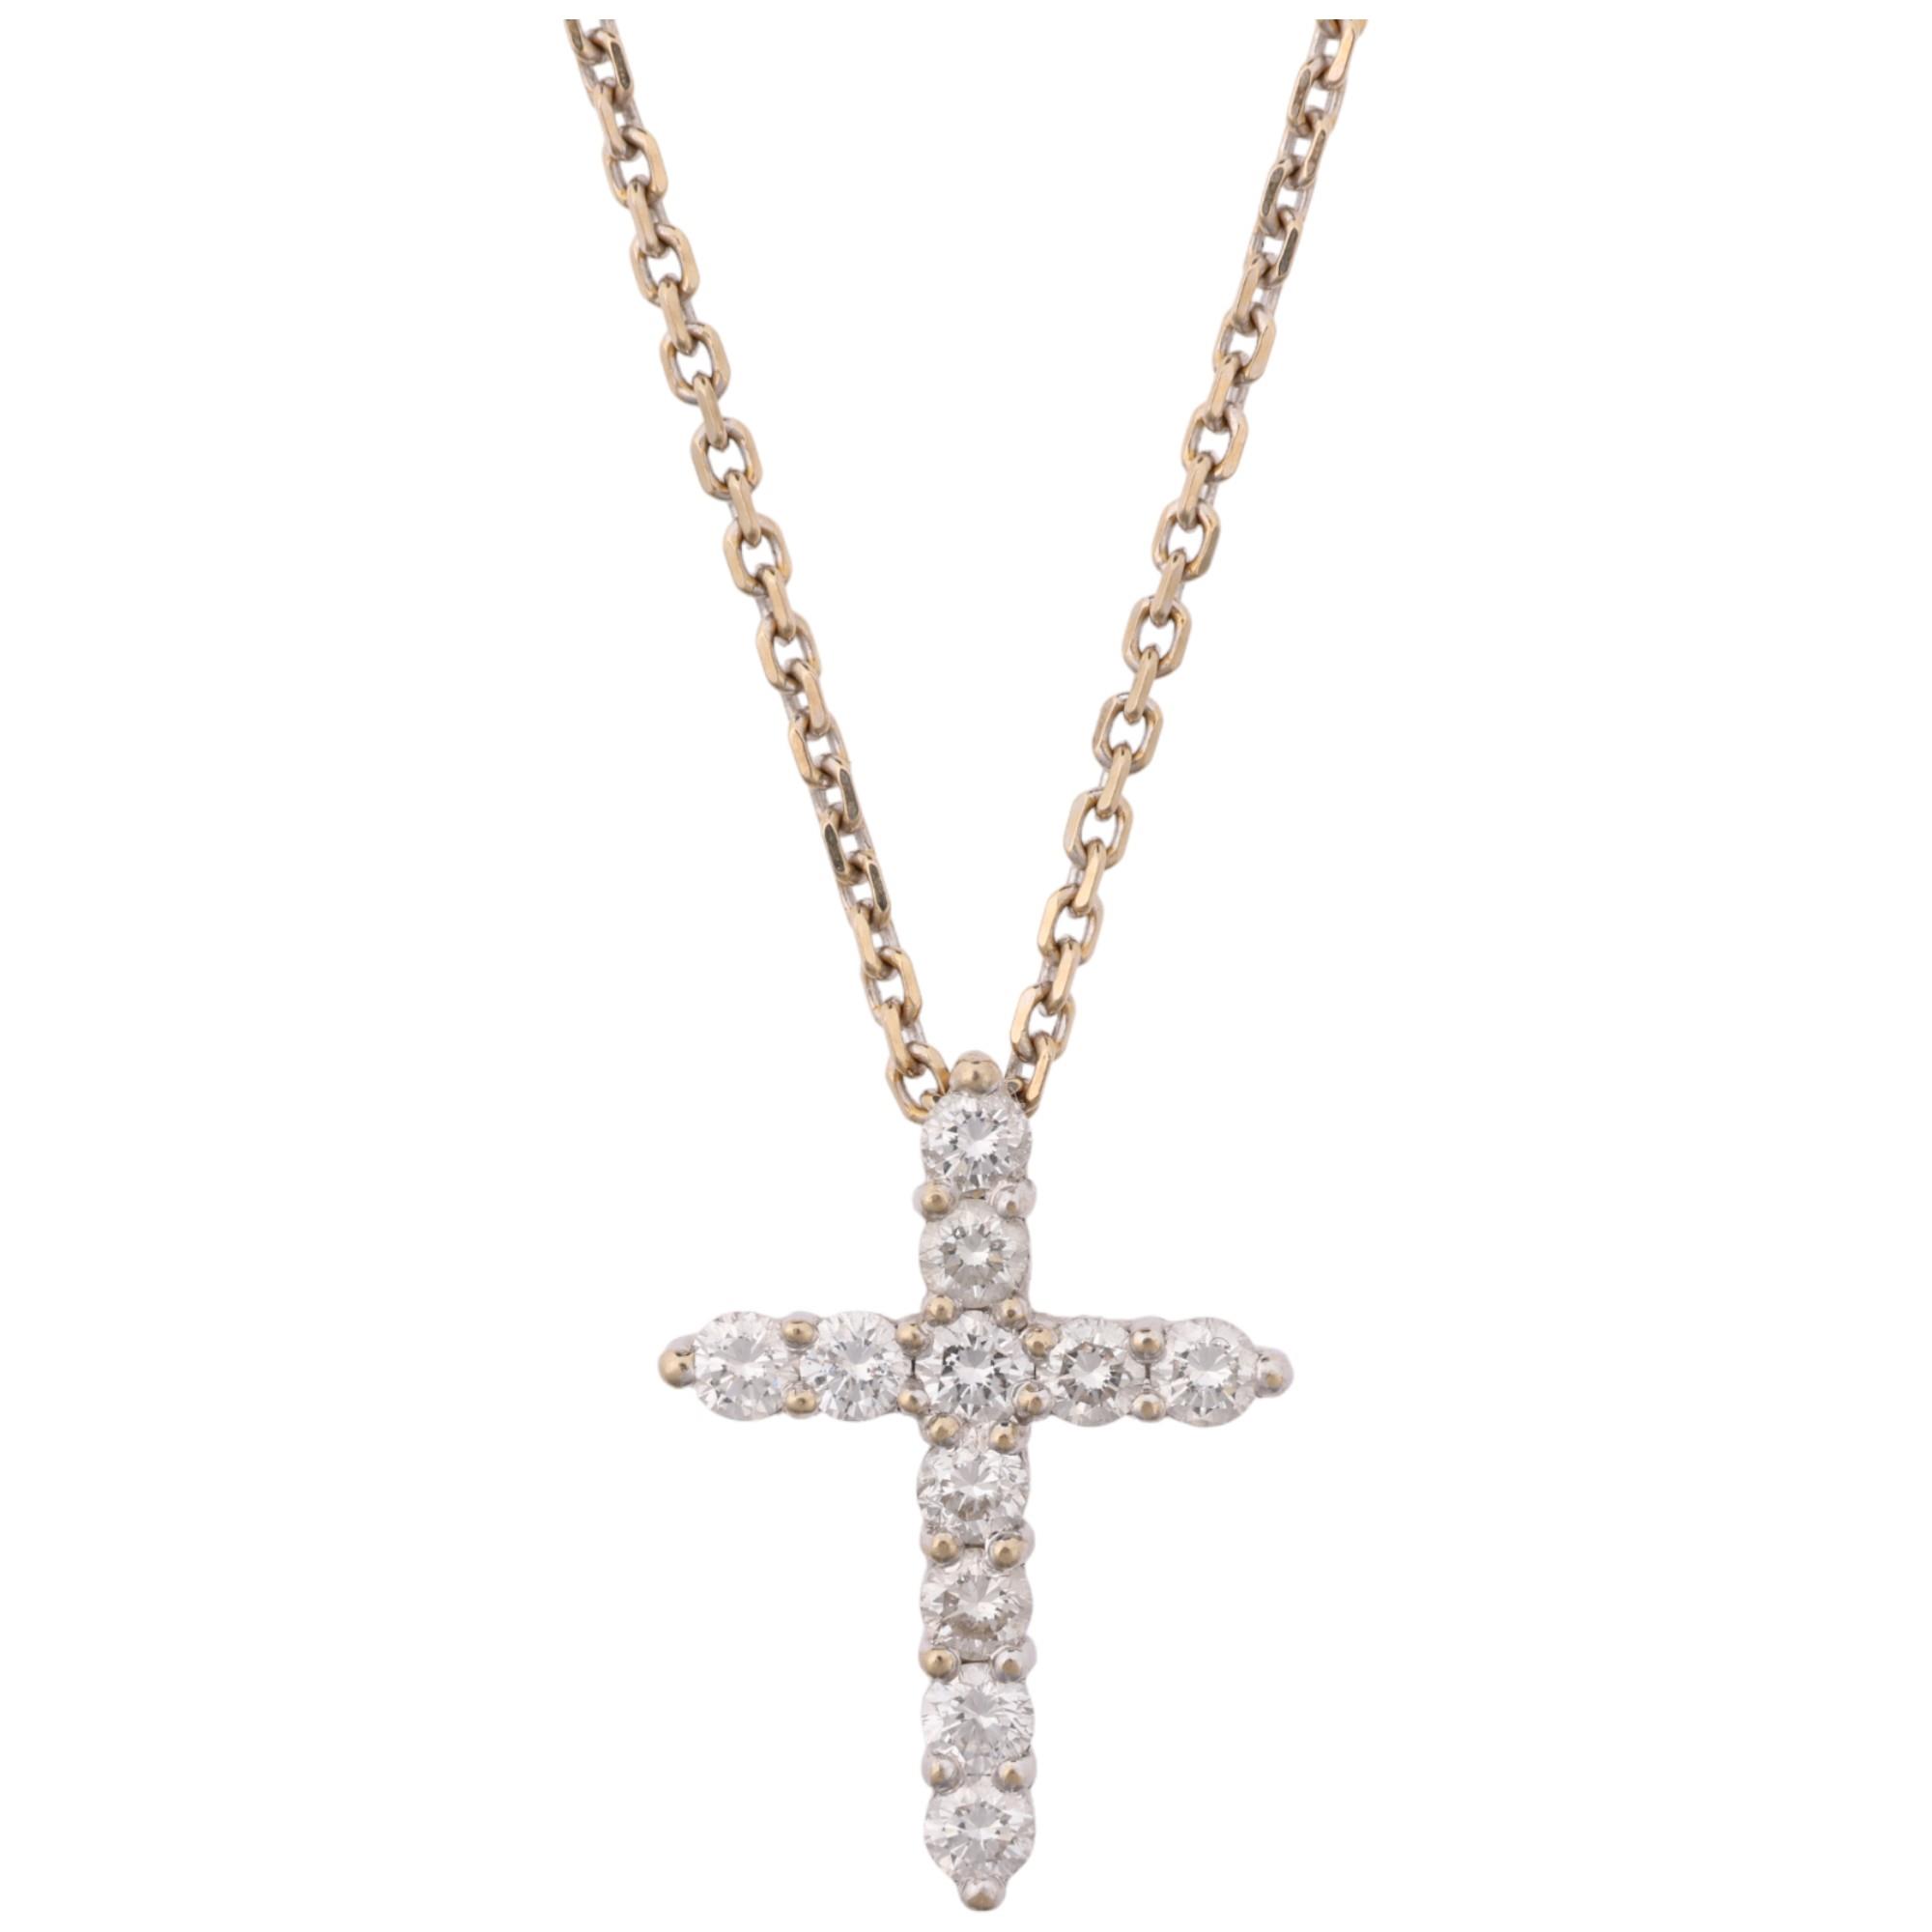 An 18ct white gold diamond cross pendant necklace, claw set with modern round brilliant-cut